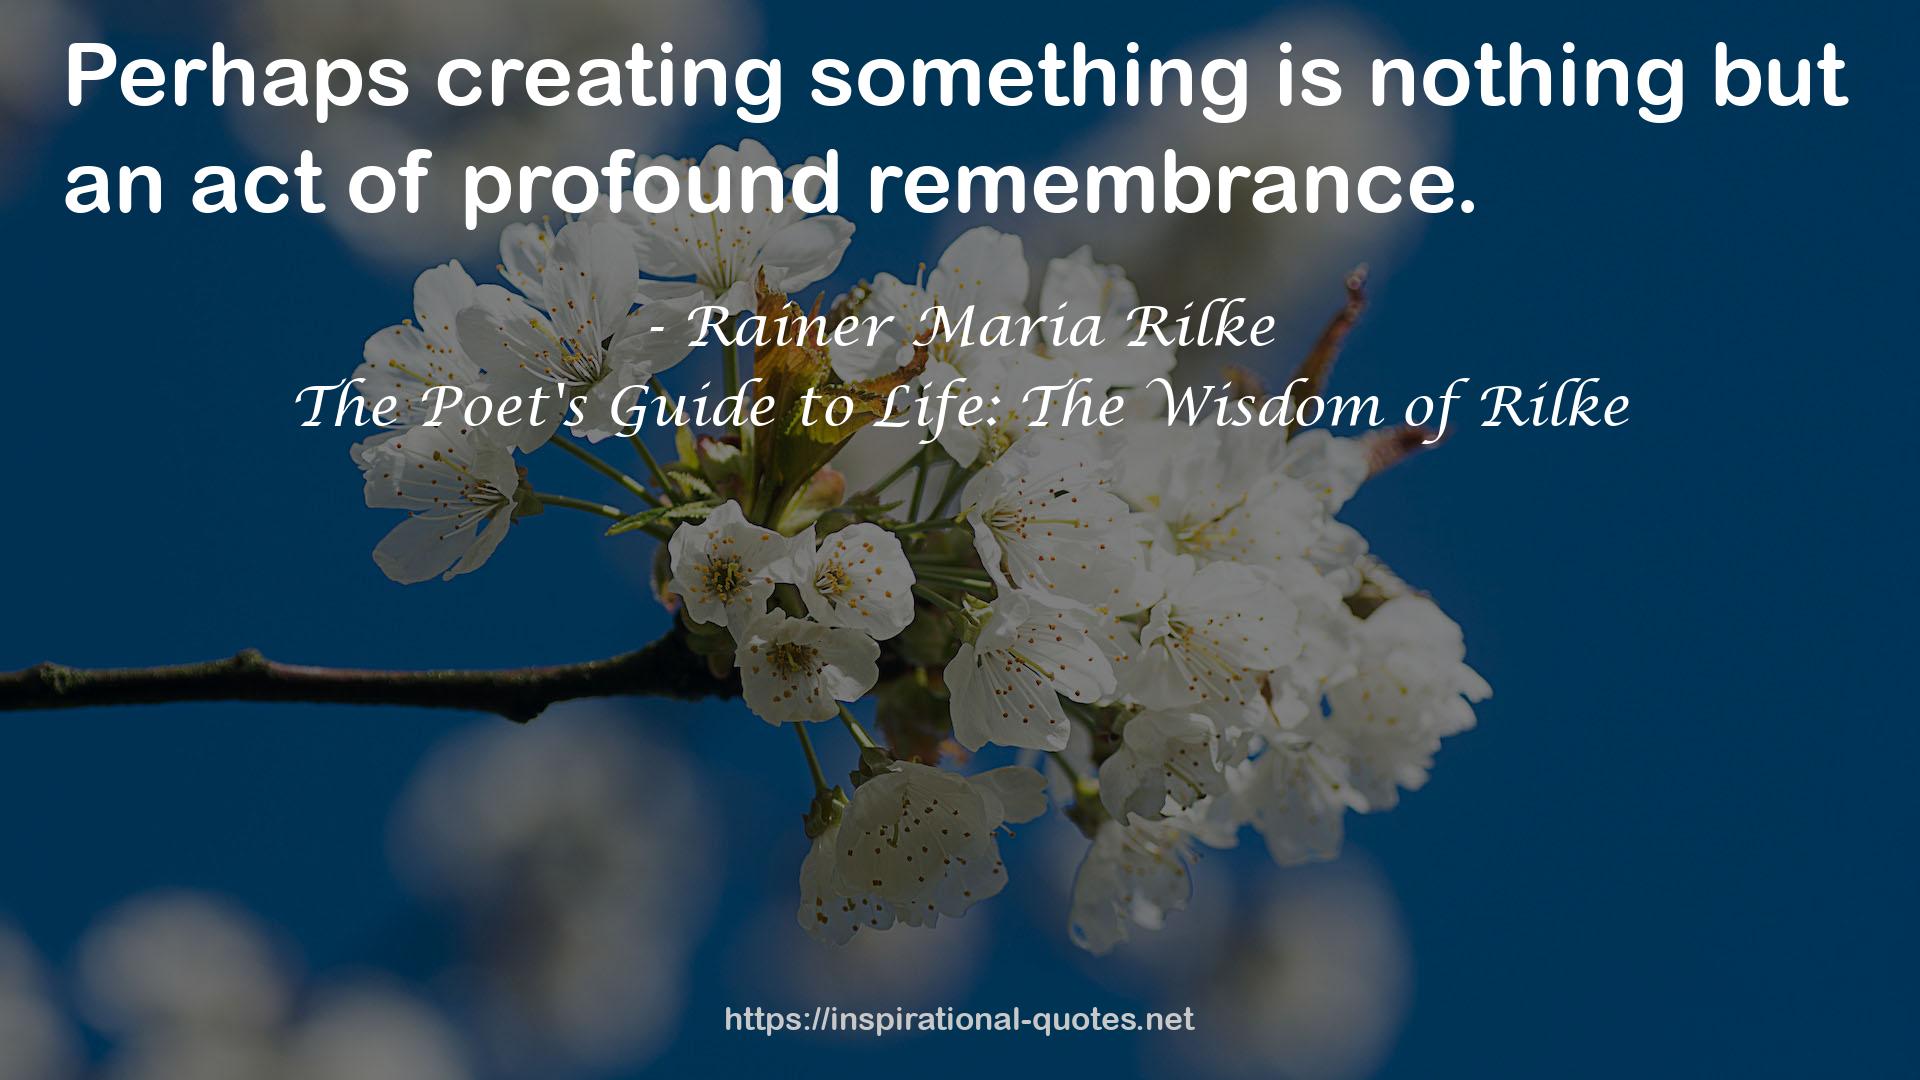 The Poet's Guide to Life: The Wisdom of Rilke QUOTES